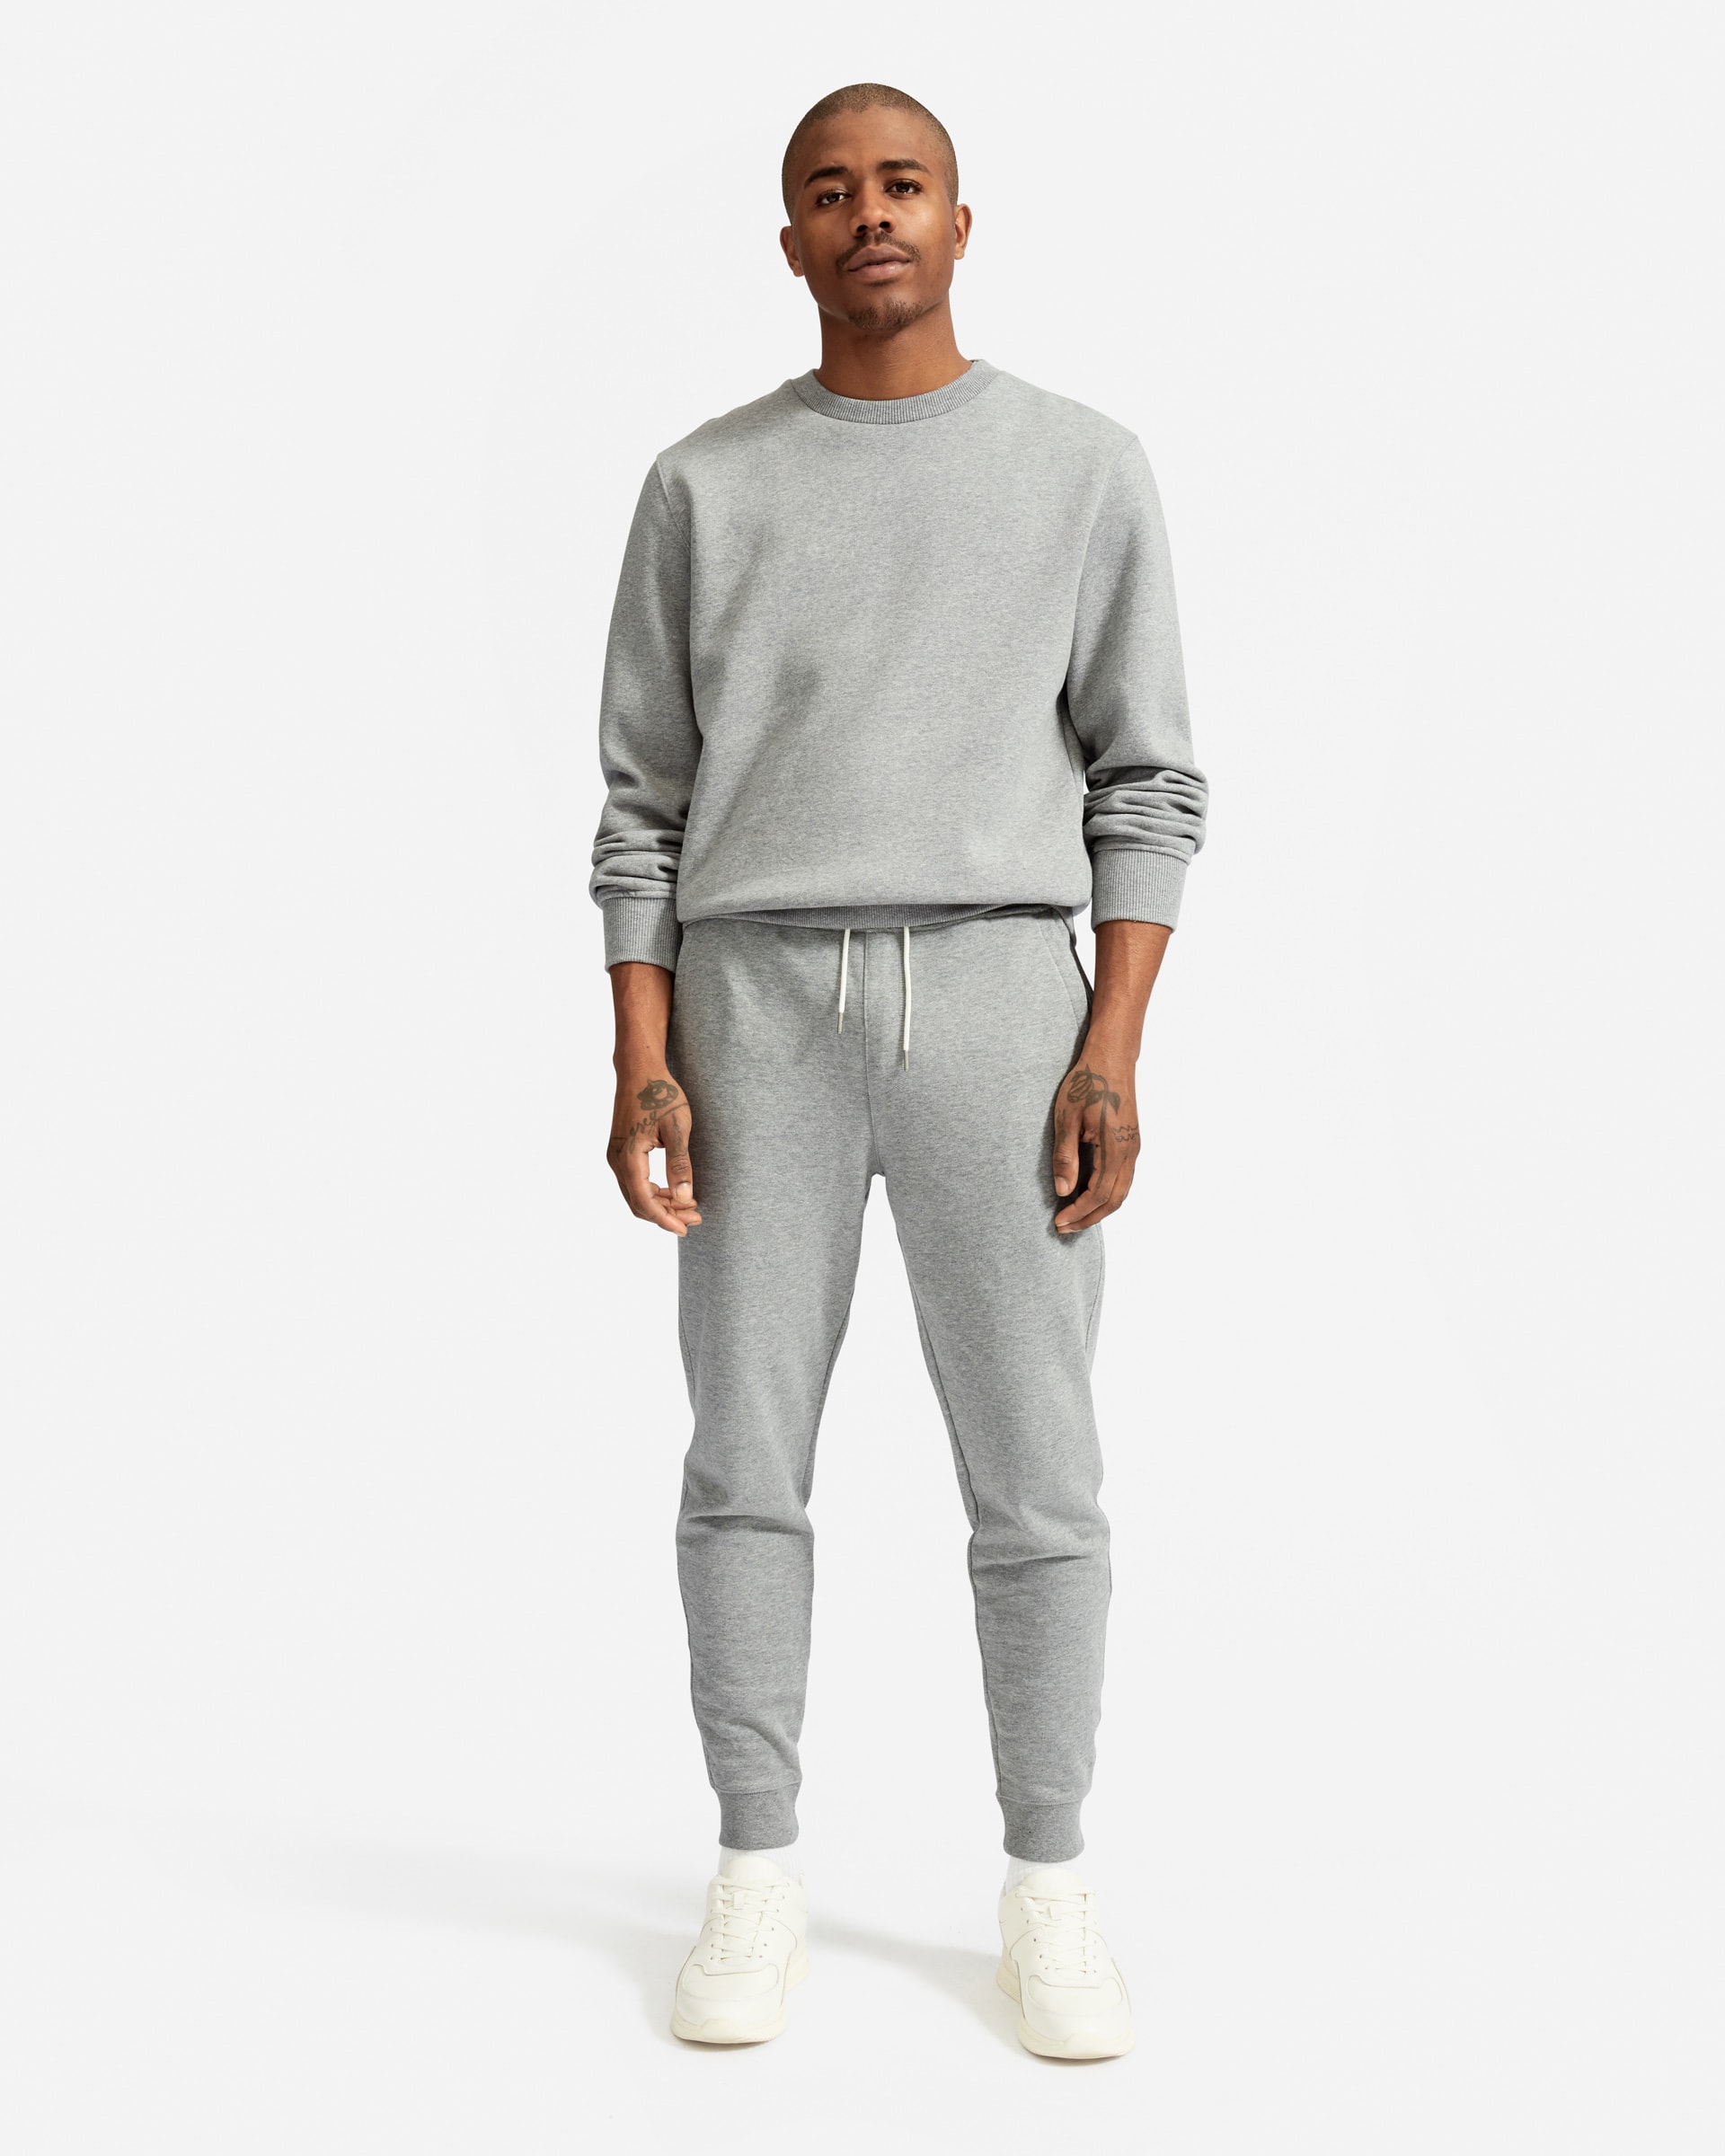 The Classic French Terry Sweatpant Heathered Grey – Everlane